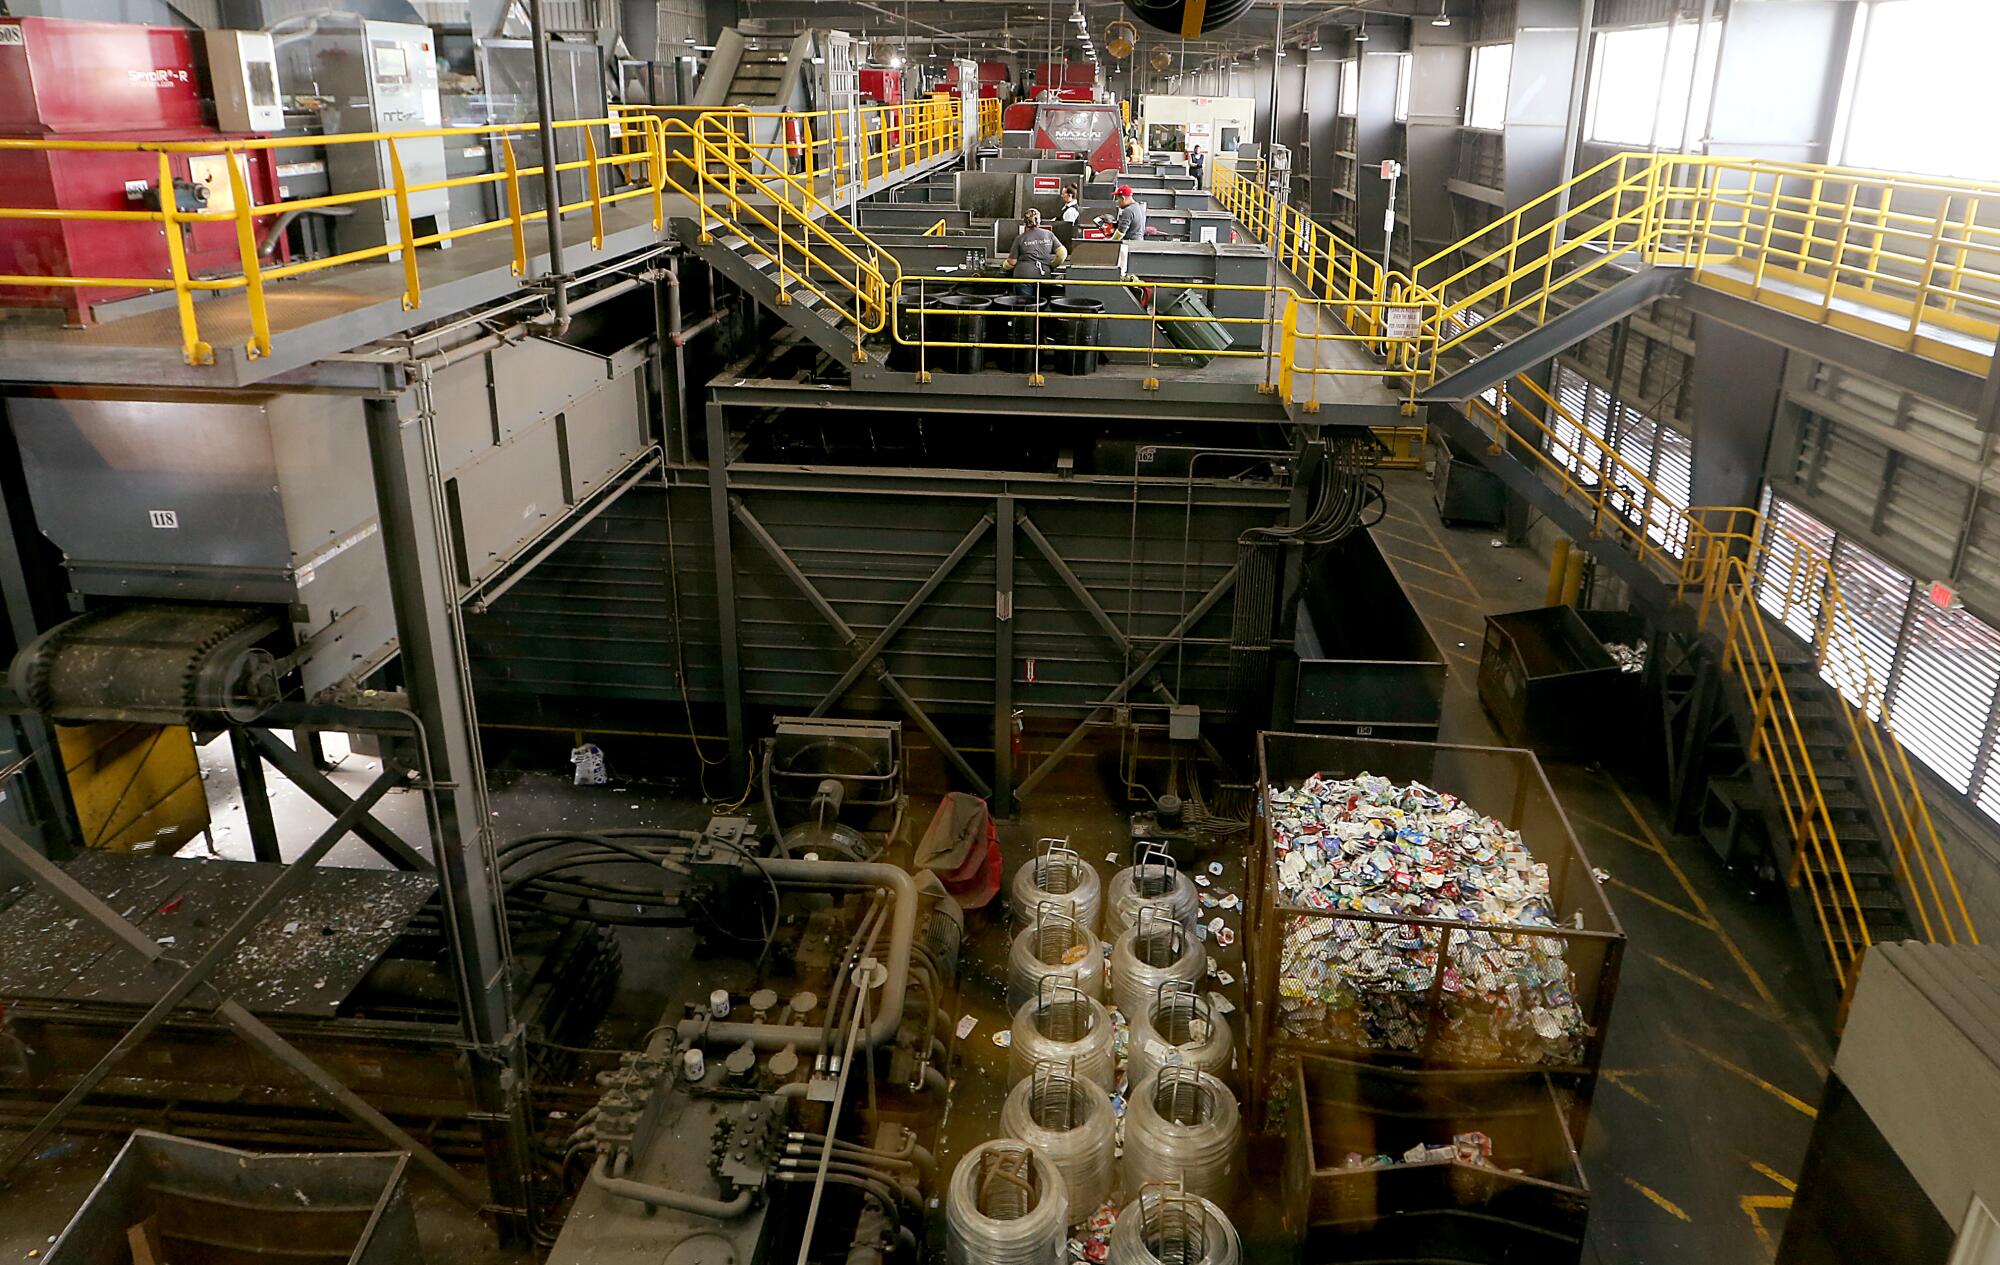 Large waste recycling machinery is housed inside the Athens material recovery facility in Sun Valley.